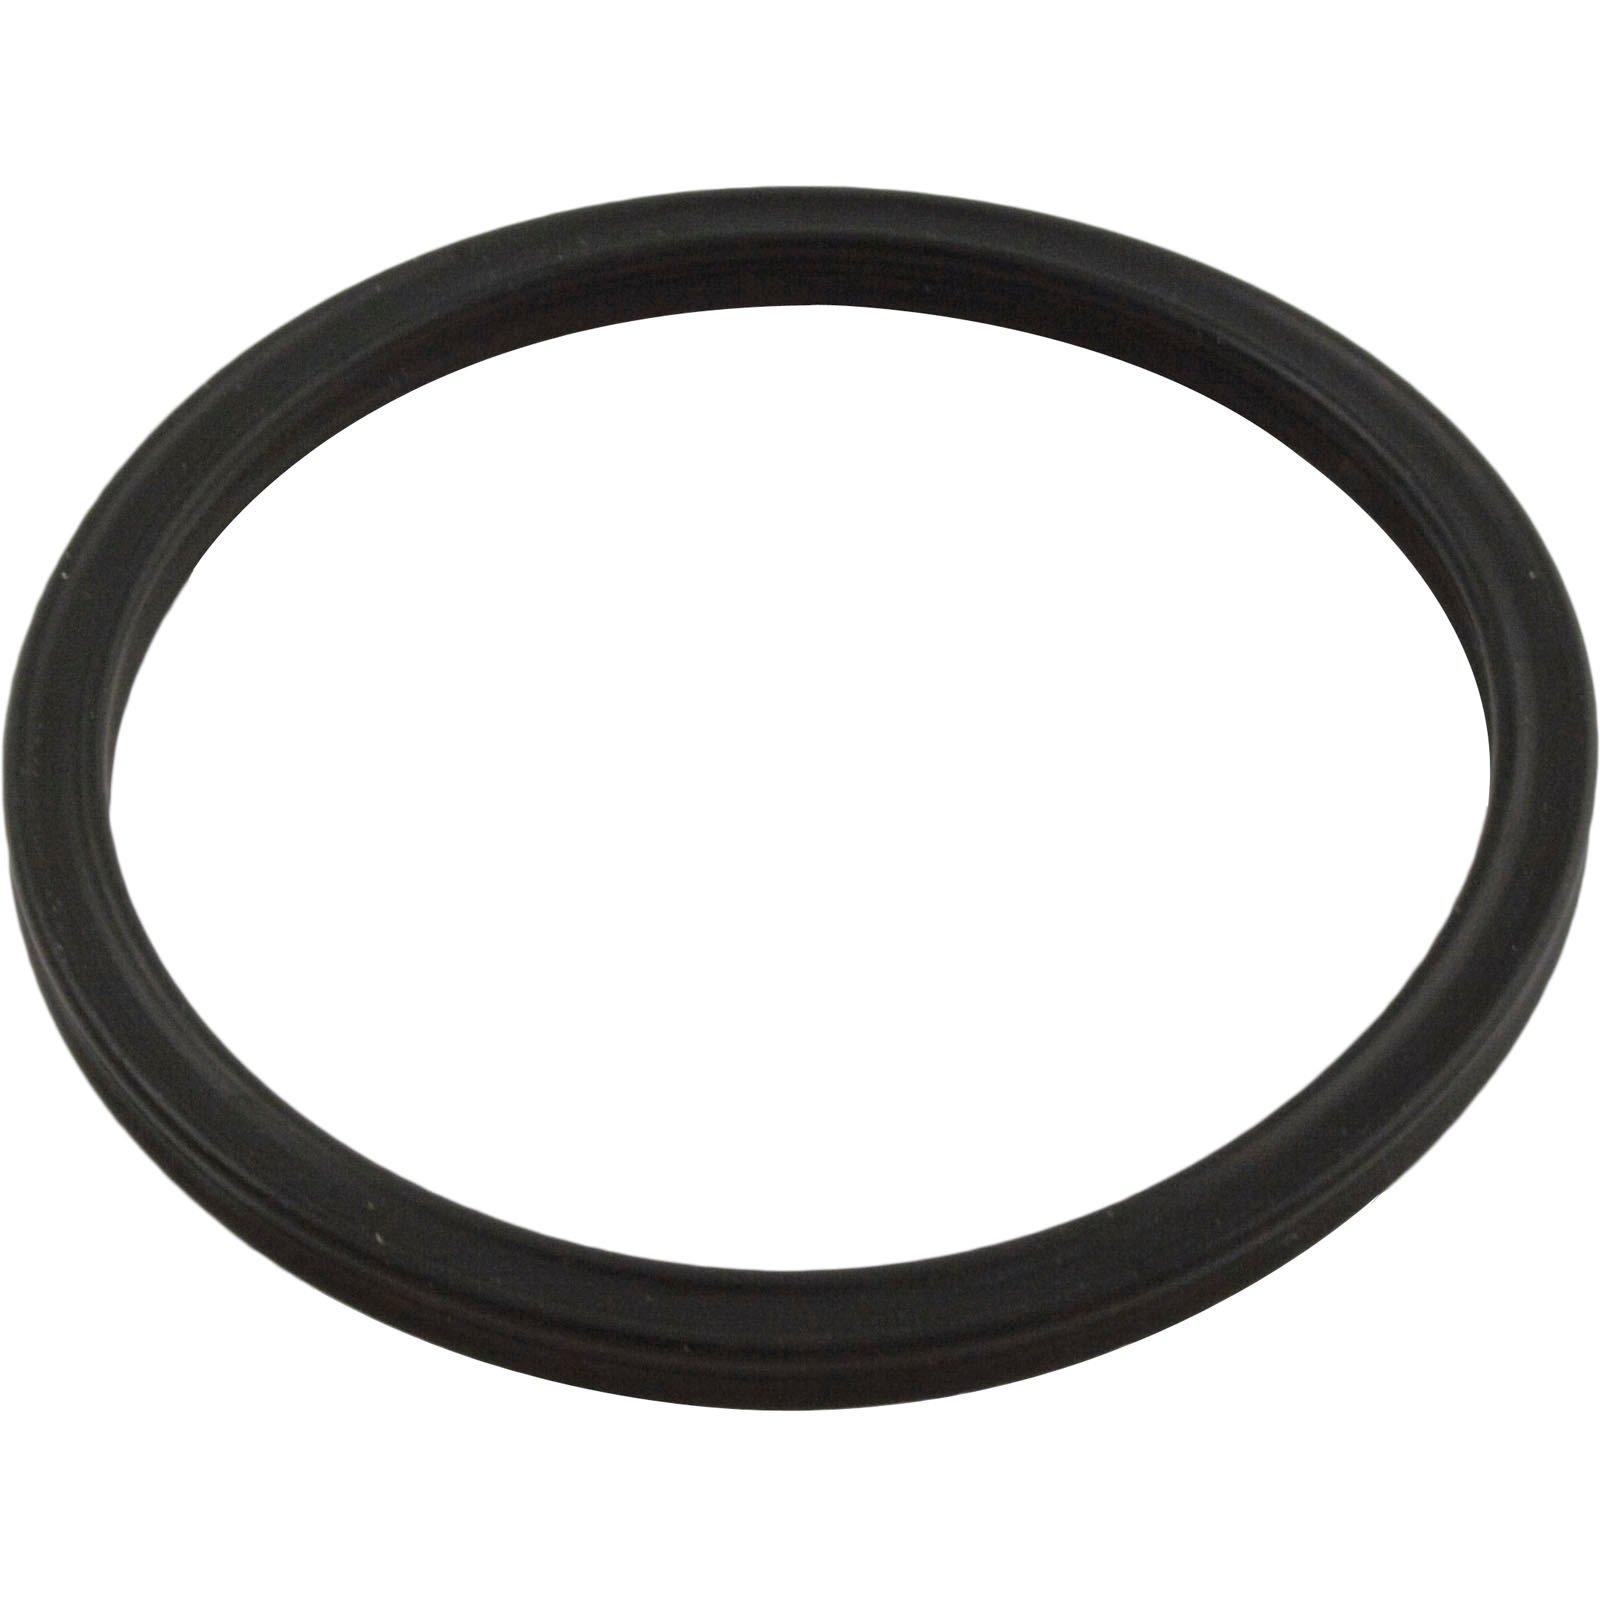 All Seals - Replacement Diffuser O-Ring for Pentair Pac Fab Challenger